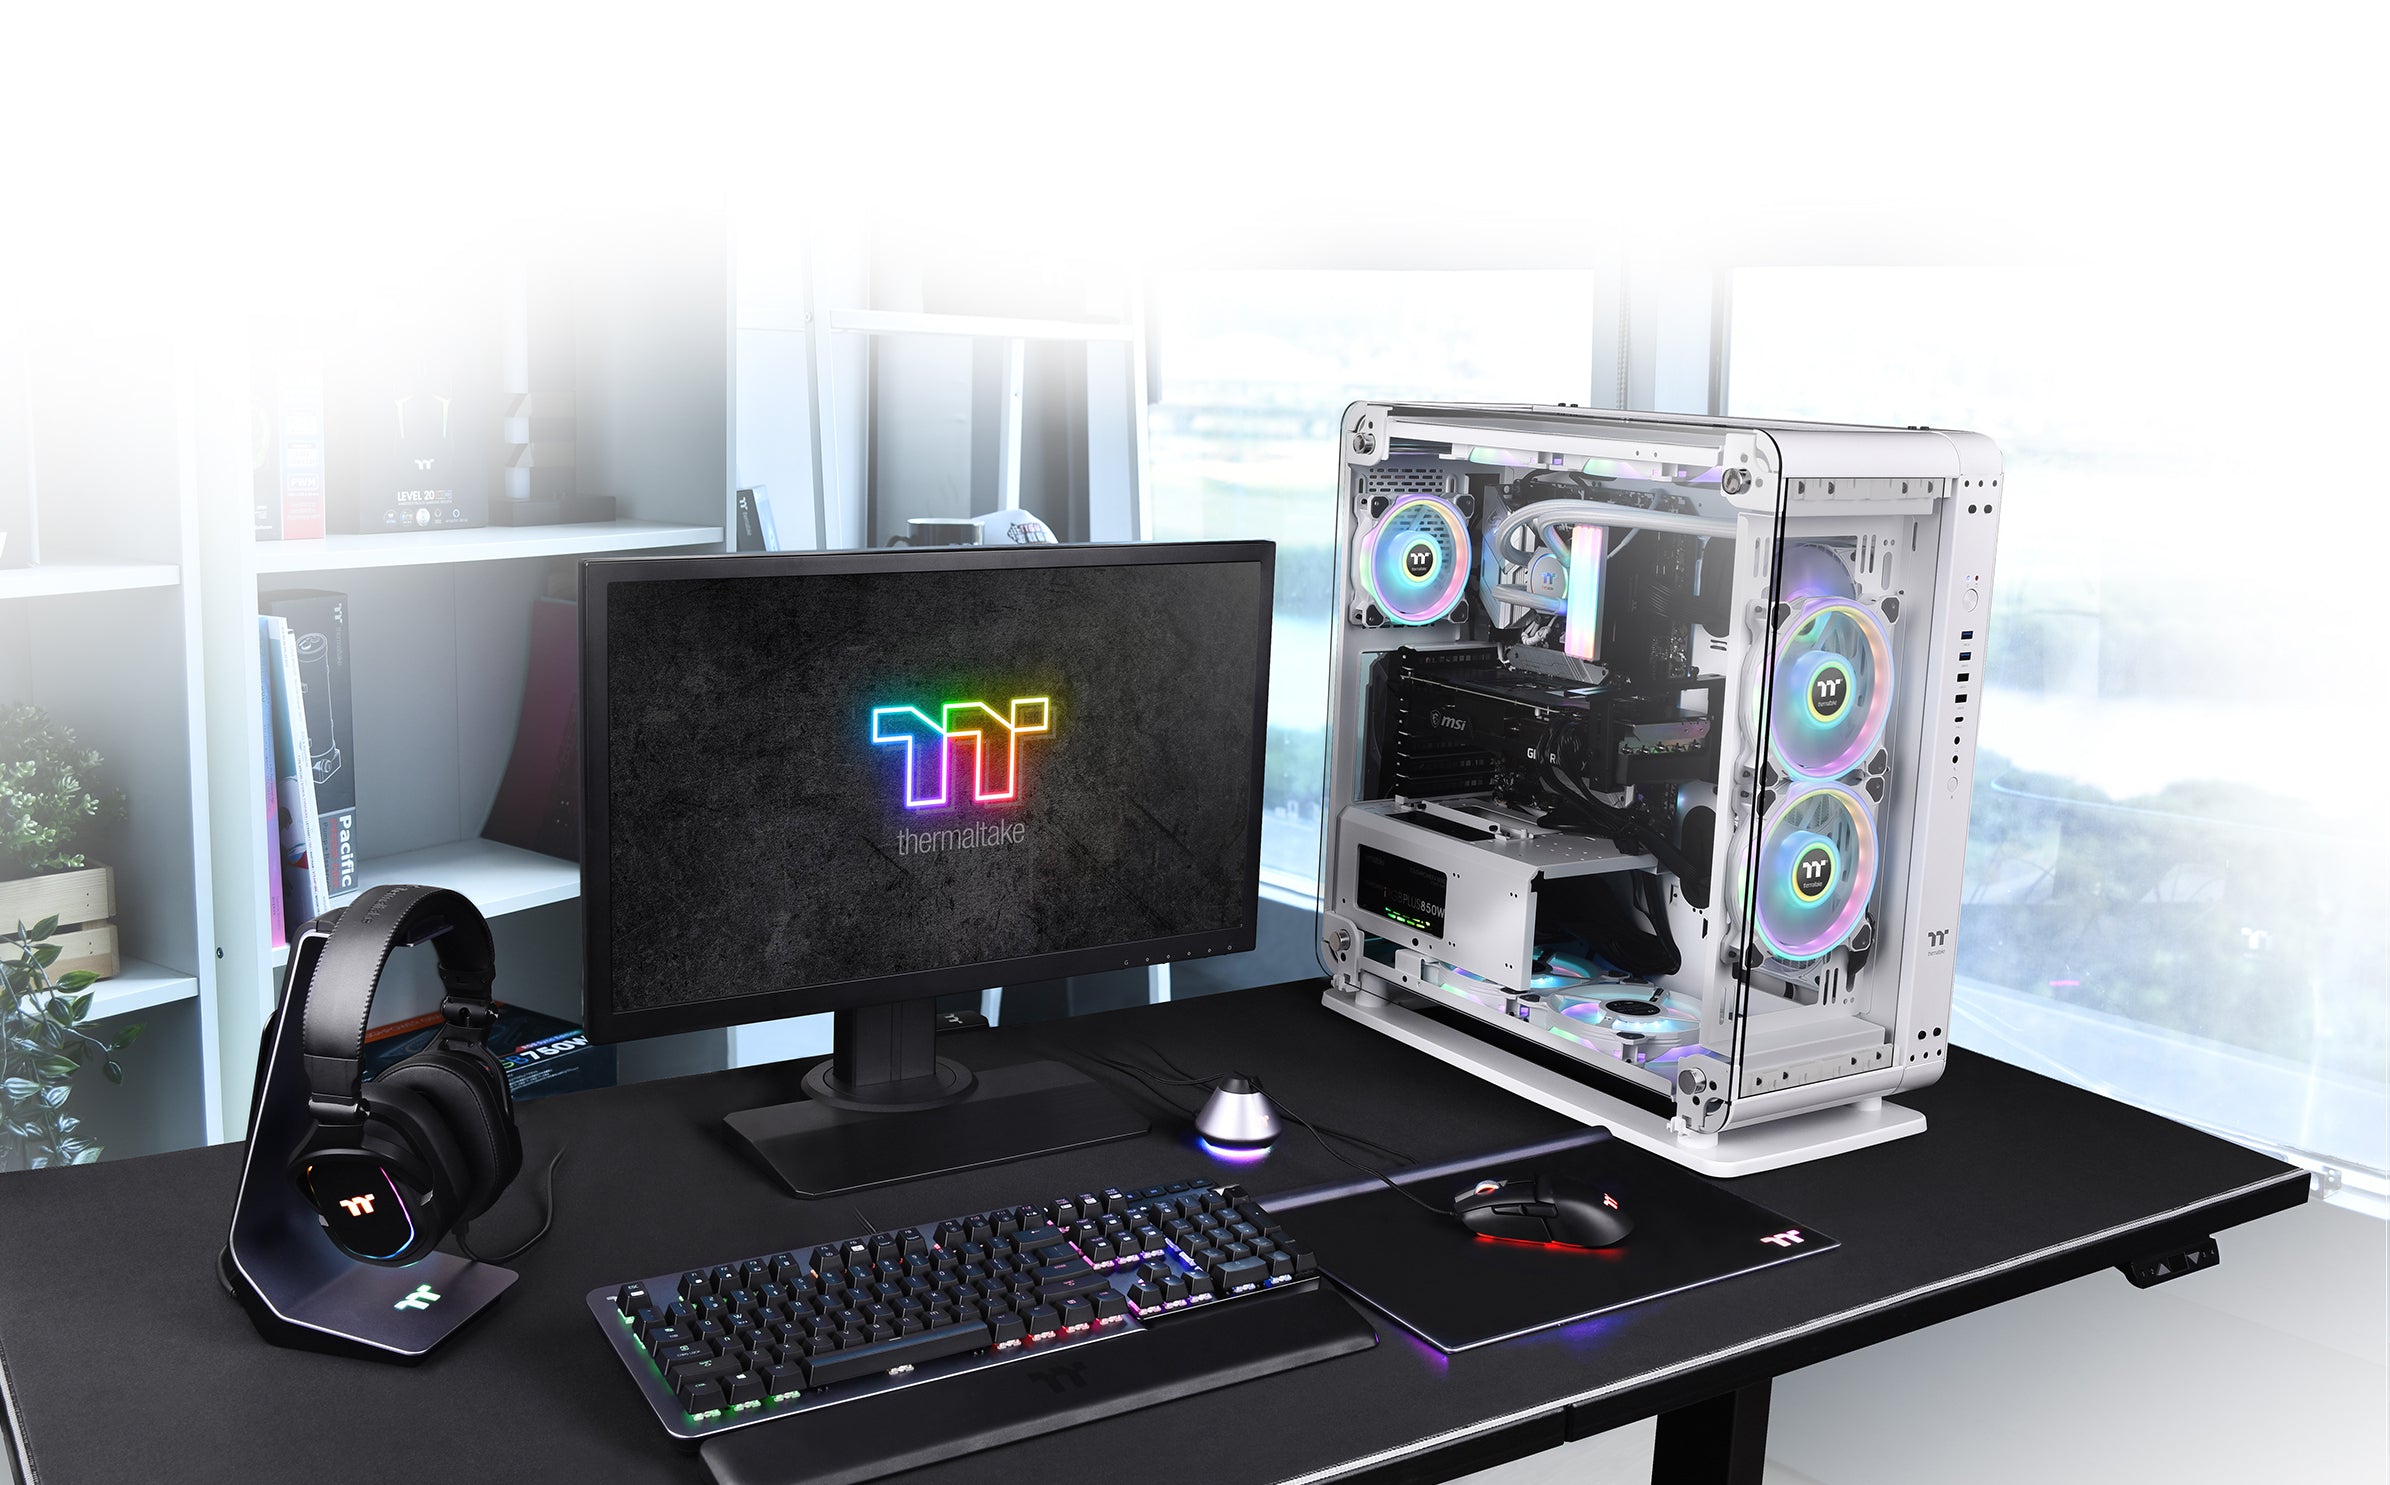 Thermaltake Core P6 Tempered Glass Mid Tower Case